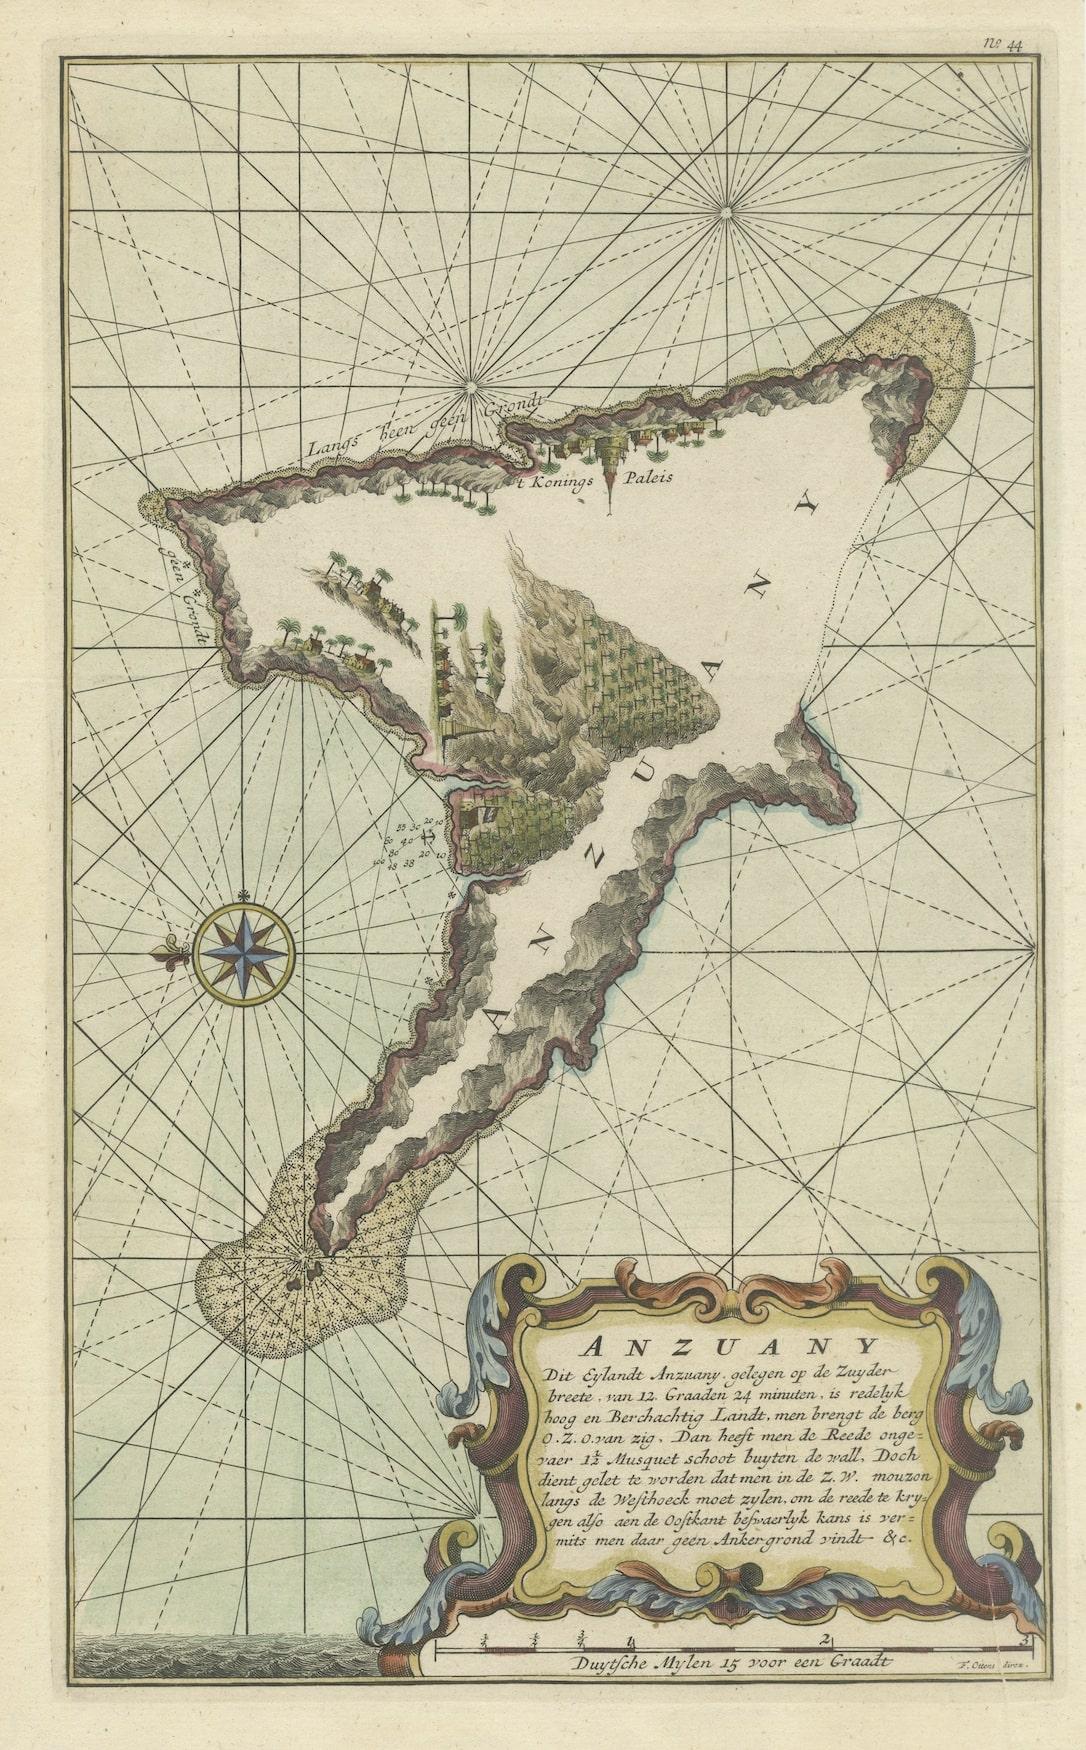 Early 18th Century Antique Engraving of the Island Nzwani or Anzuany of the Comoros Islands, 1726 For Sale